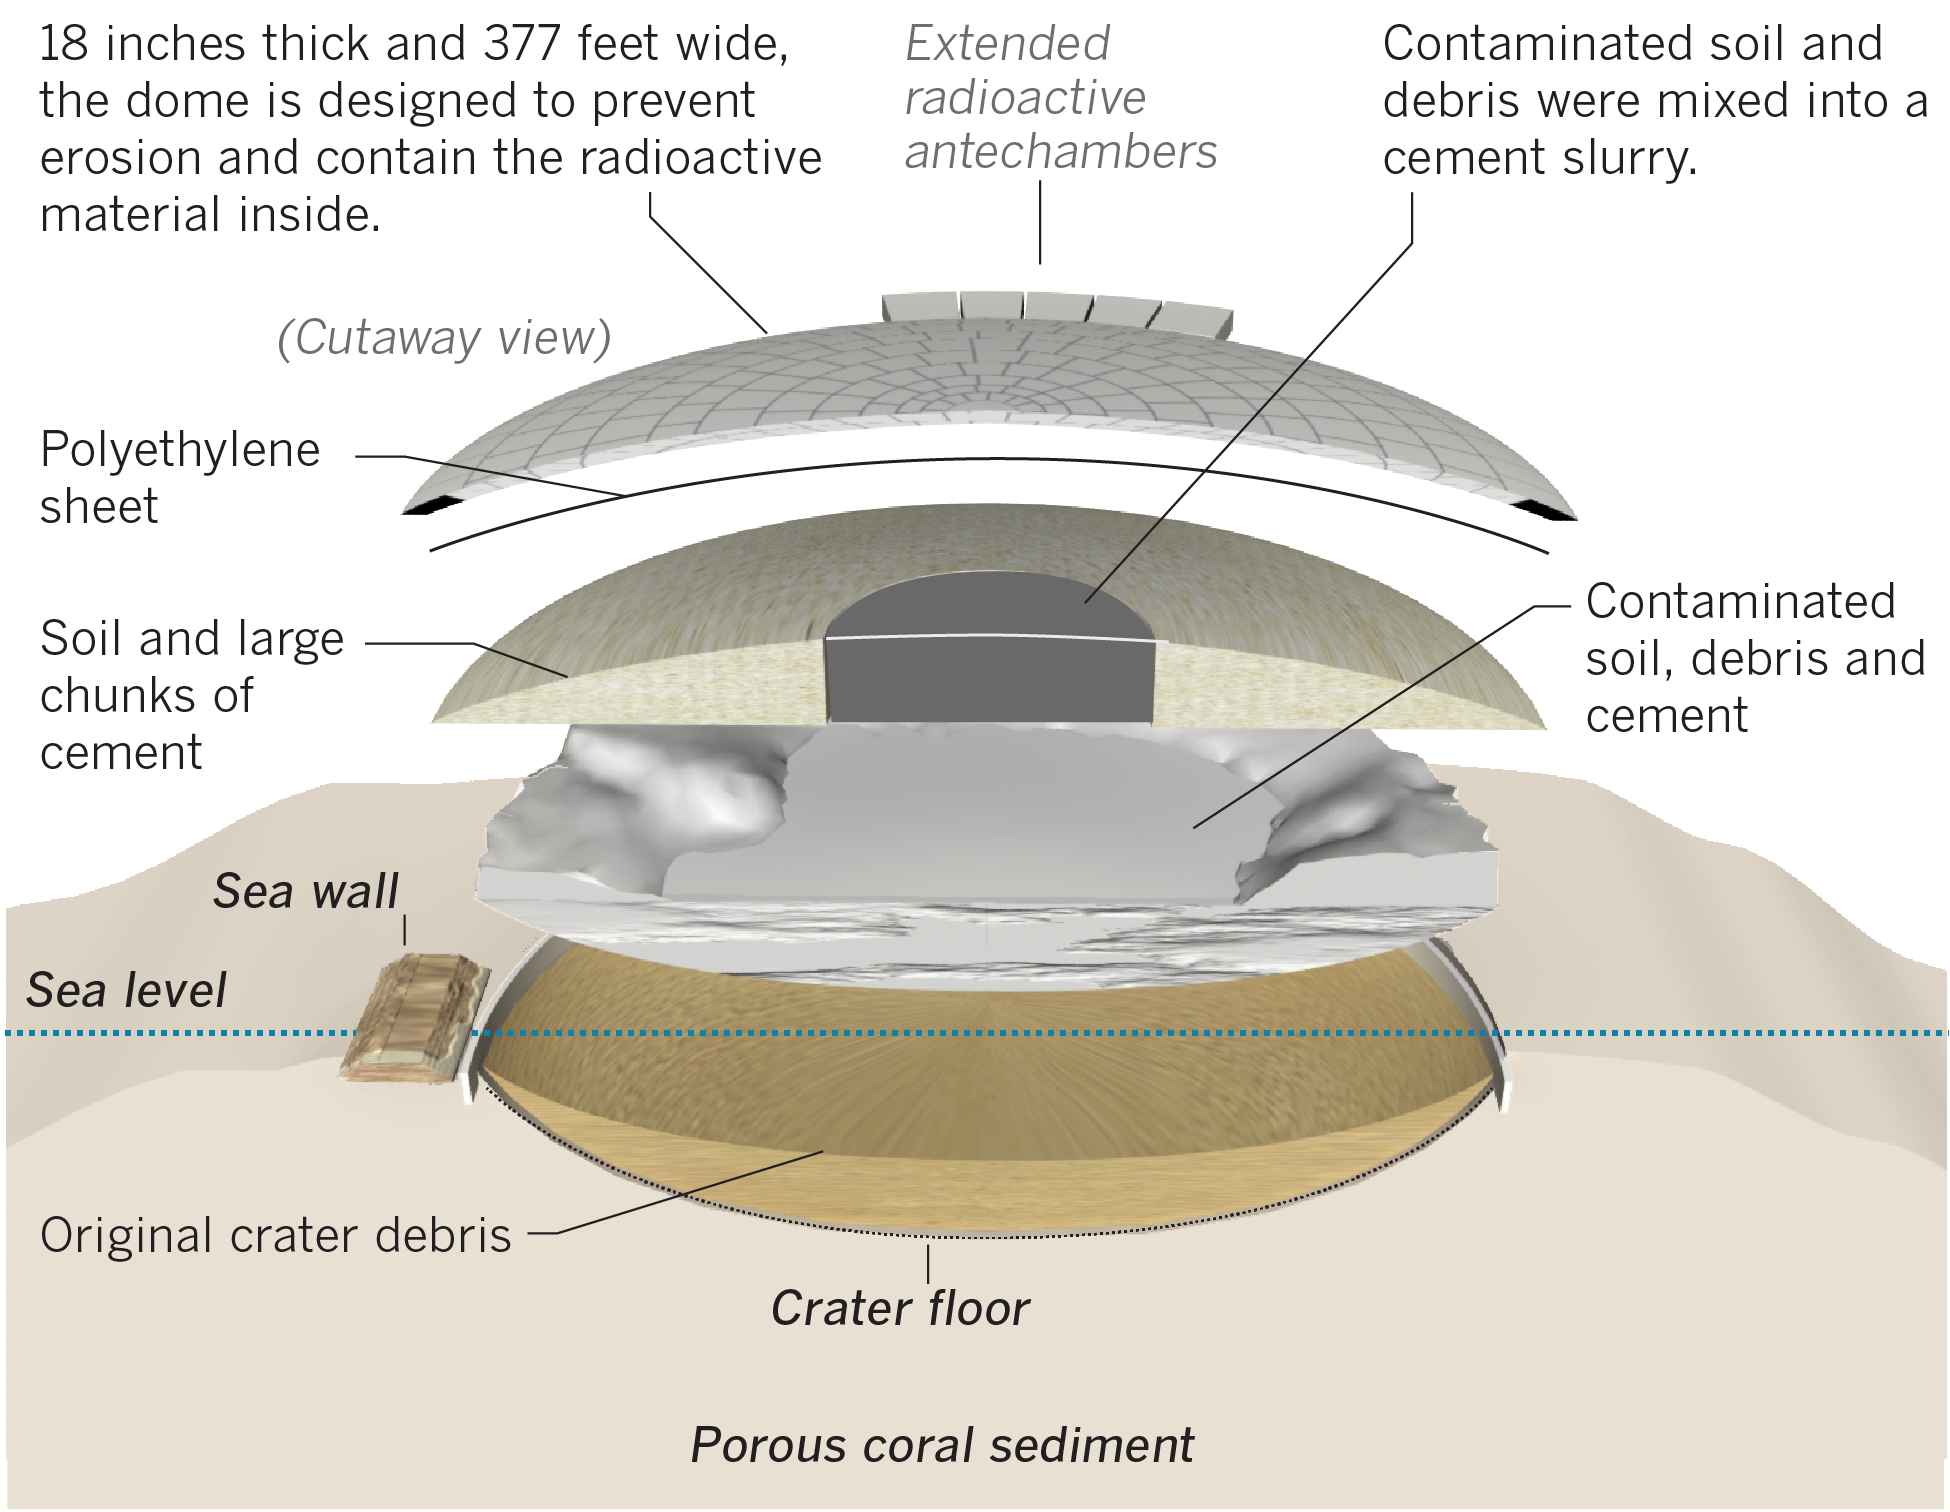 graphic showing what is underneath the dome